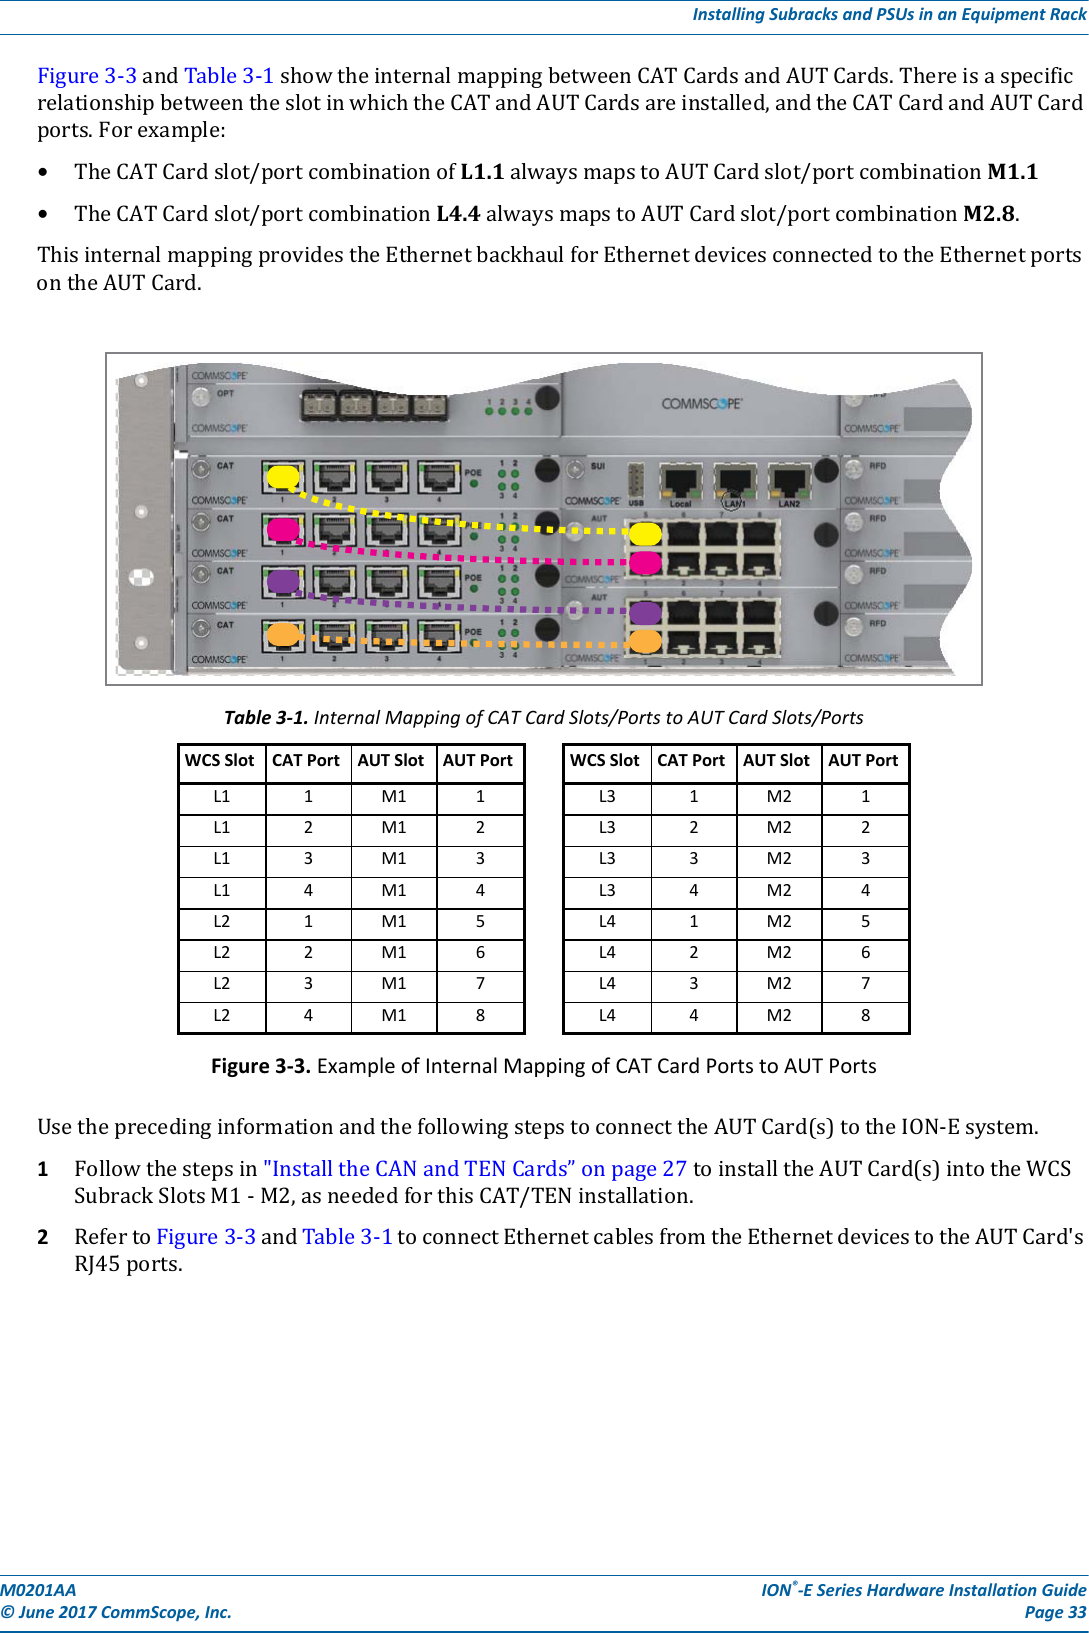 M0201AA ION®-E Series Hardware Installation Guide© June 2017 CommScope, Inc. Page 33Installing Subracks and PSUs in an Equipment RackFigure3-3andTable3-1showtheinternalmappingbetweenCATCardsandAUTCards.ThereisaspecificrelationshipbetweentheslotinwhichtheCATandAUTCardsareinstalled,andtheCATCardandAUTCardports.Forexample:•TheCATCardslot/portcombinationofL1.1alwaysmapstoAUTCardslot/portcombinationM1.1•TheCATCardslot/portcombinationL4.4alwaysmapstoAUTCardslot/portcombinationM2.8.ThisinternalmappingprovidestheEthernetbackhaulforEthernetdevicesconnectedtotheEthernetportsontheAUTCard.Figure 3-3. Example of Internal Mapping of CAT Card Ports to AUT PortsUsetheprecedinginformationandthefollowingstepstoconnecttheAUTCard(s)totheION-Esystem.1Followthestepsin&quot;InstalltheCANandTENCards”onpage27toinstalltheAUTCard(s)intotheWCSSubrackSlotsM1-M2,asneededforthisCAT/TENinstallation.2RefertoFigure3-3andTable3-1toconnectEthernetcablesfromtheEthernetdevicestotheAUTCard&apos;sRJ45ports.Table 3-1. Internal Mapping of CAT Card Slots/Ports to AUT Card Slots/PortsWCS Slot CAT Port AUT Slot AUT Port WCS Slot CAT Port AUT Slot AUT PortL1 1M1 1L3 1M2 1L1 2M1 2L3 2M2 2L1 3M1 3L3 3M2 3L1 4M1 4L3 4M2 4L2 1M1 5L4 1M2 5L2 2M1 6L4 2M2 6L2 3M1 7L4 3M2 7L2 4M1 8L4 4M2 8